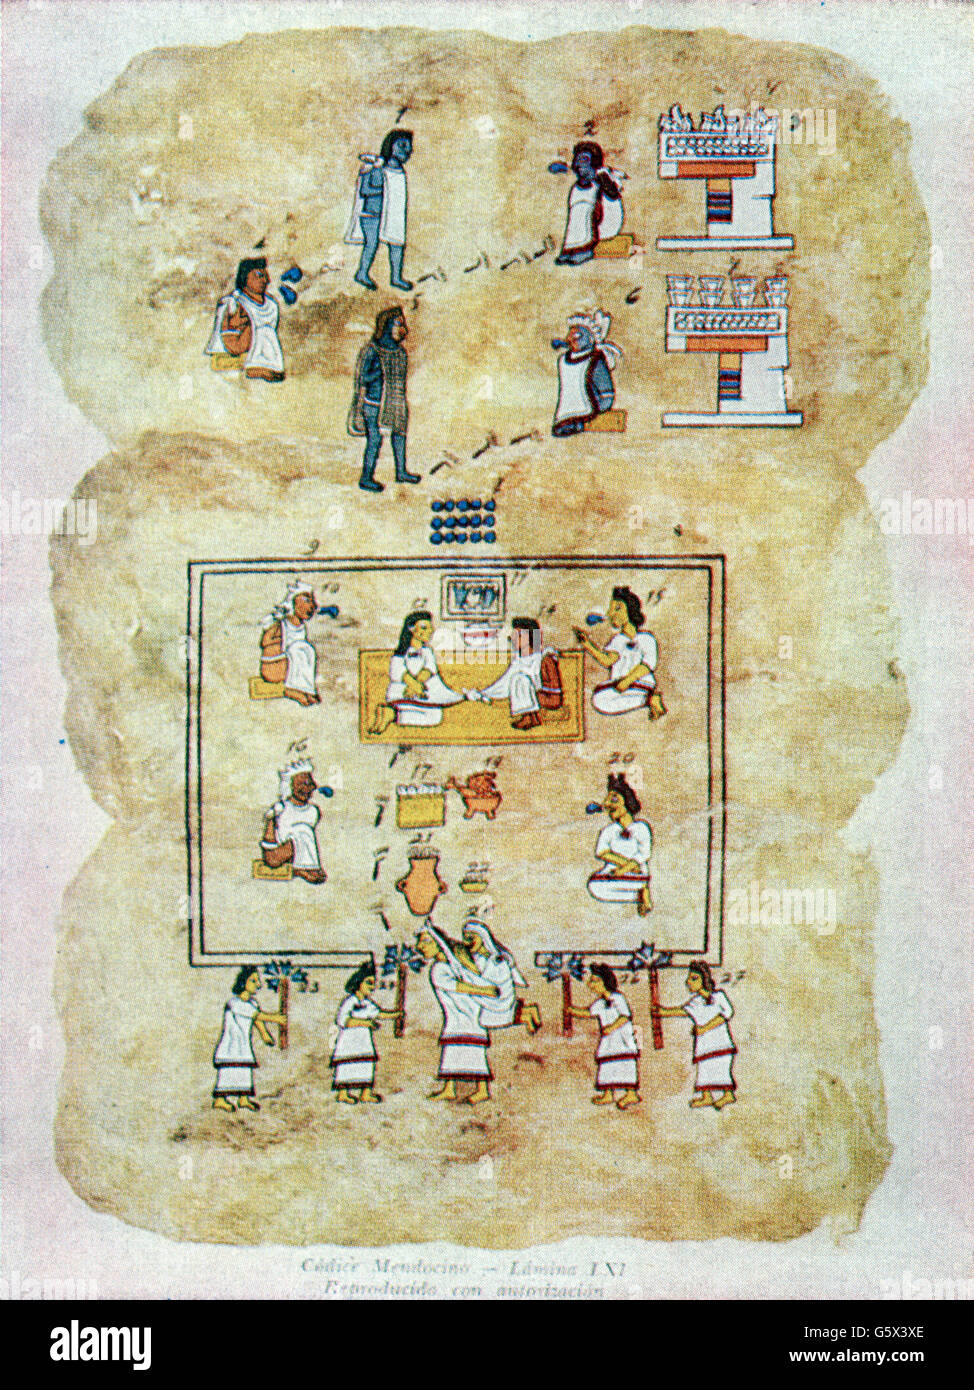 geography / travel, Mexico, people, Aztecs, 15 year old boys starting education as priest or soldier, girl getting married, Codex Mendoza, Folio 61 recto, circa 1541 - 1542, Additional-Rights-Clearences-Not Available Stock Photo